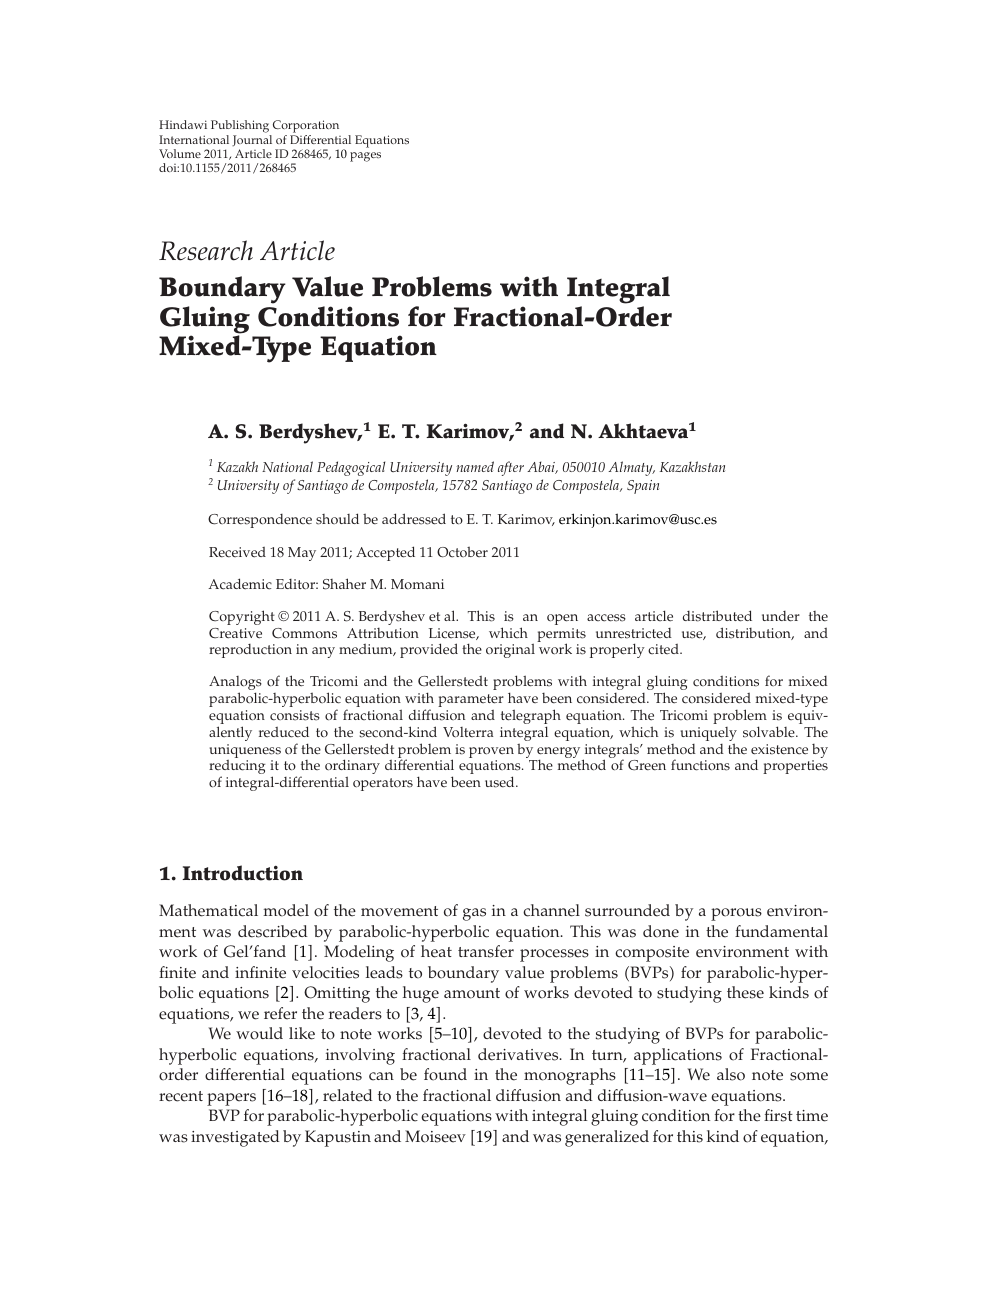 Boundary Value Problems With Integral Gluing Conditions For Fractional Order Mixed Type Equation Topic Of Research Paper In Mathematics Download Scholarly Article Pdf And Read For Free On Cyberleninka Open Science Hub